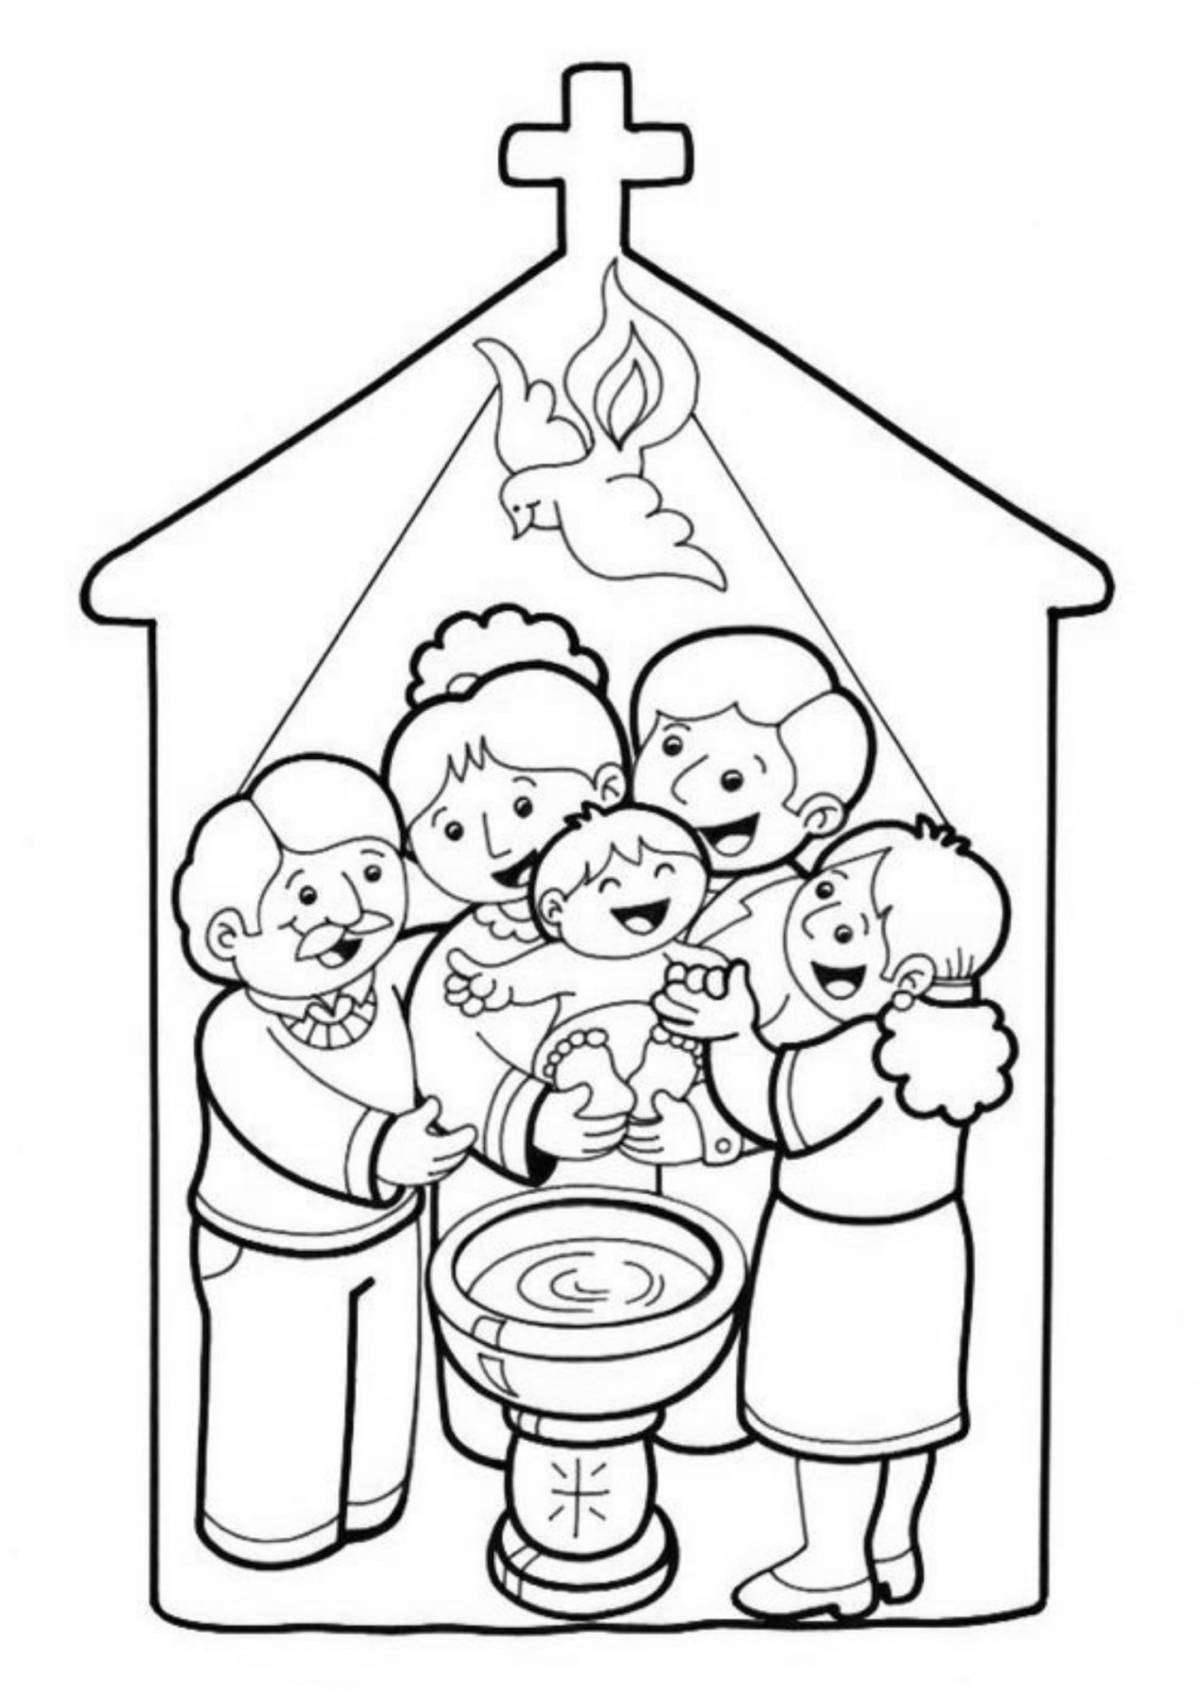 Coloring book the joy of baptism